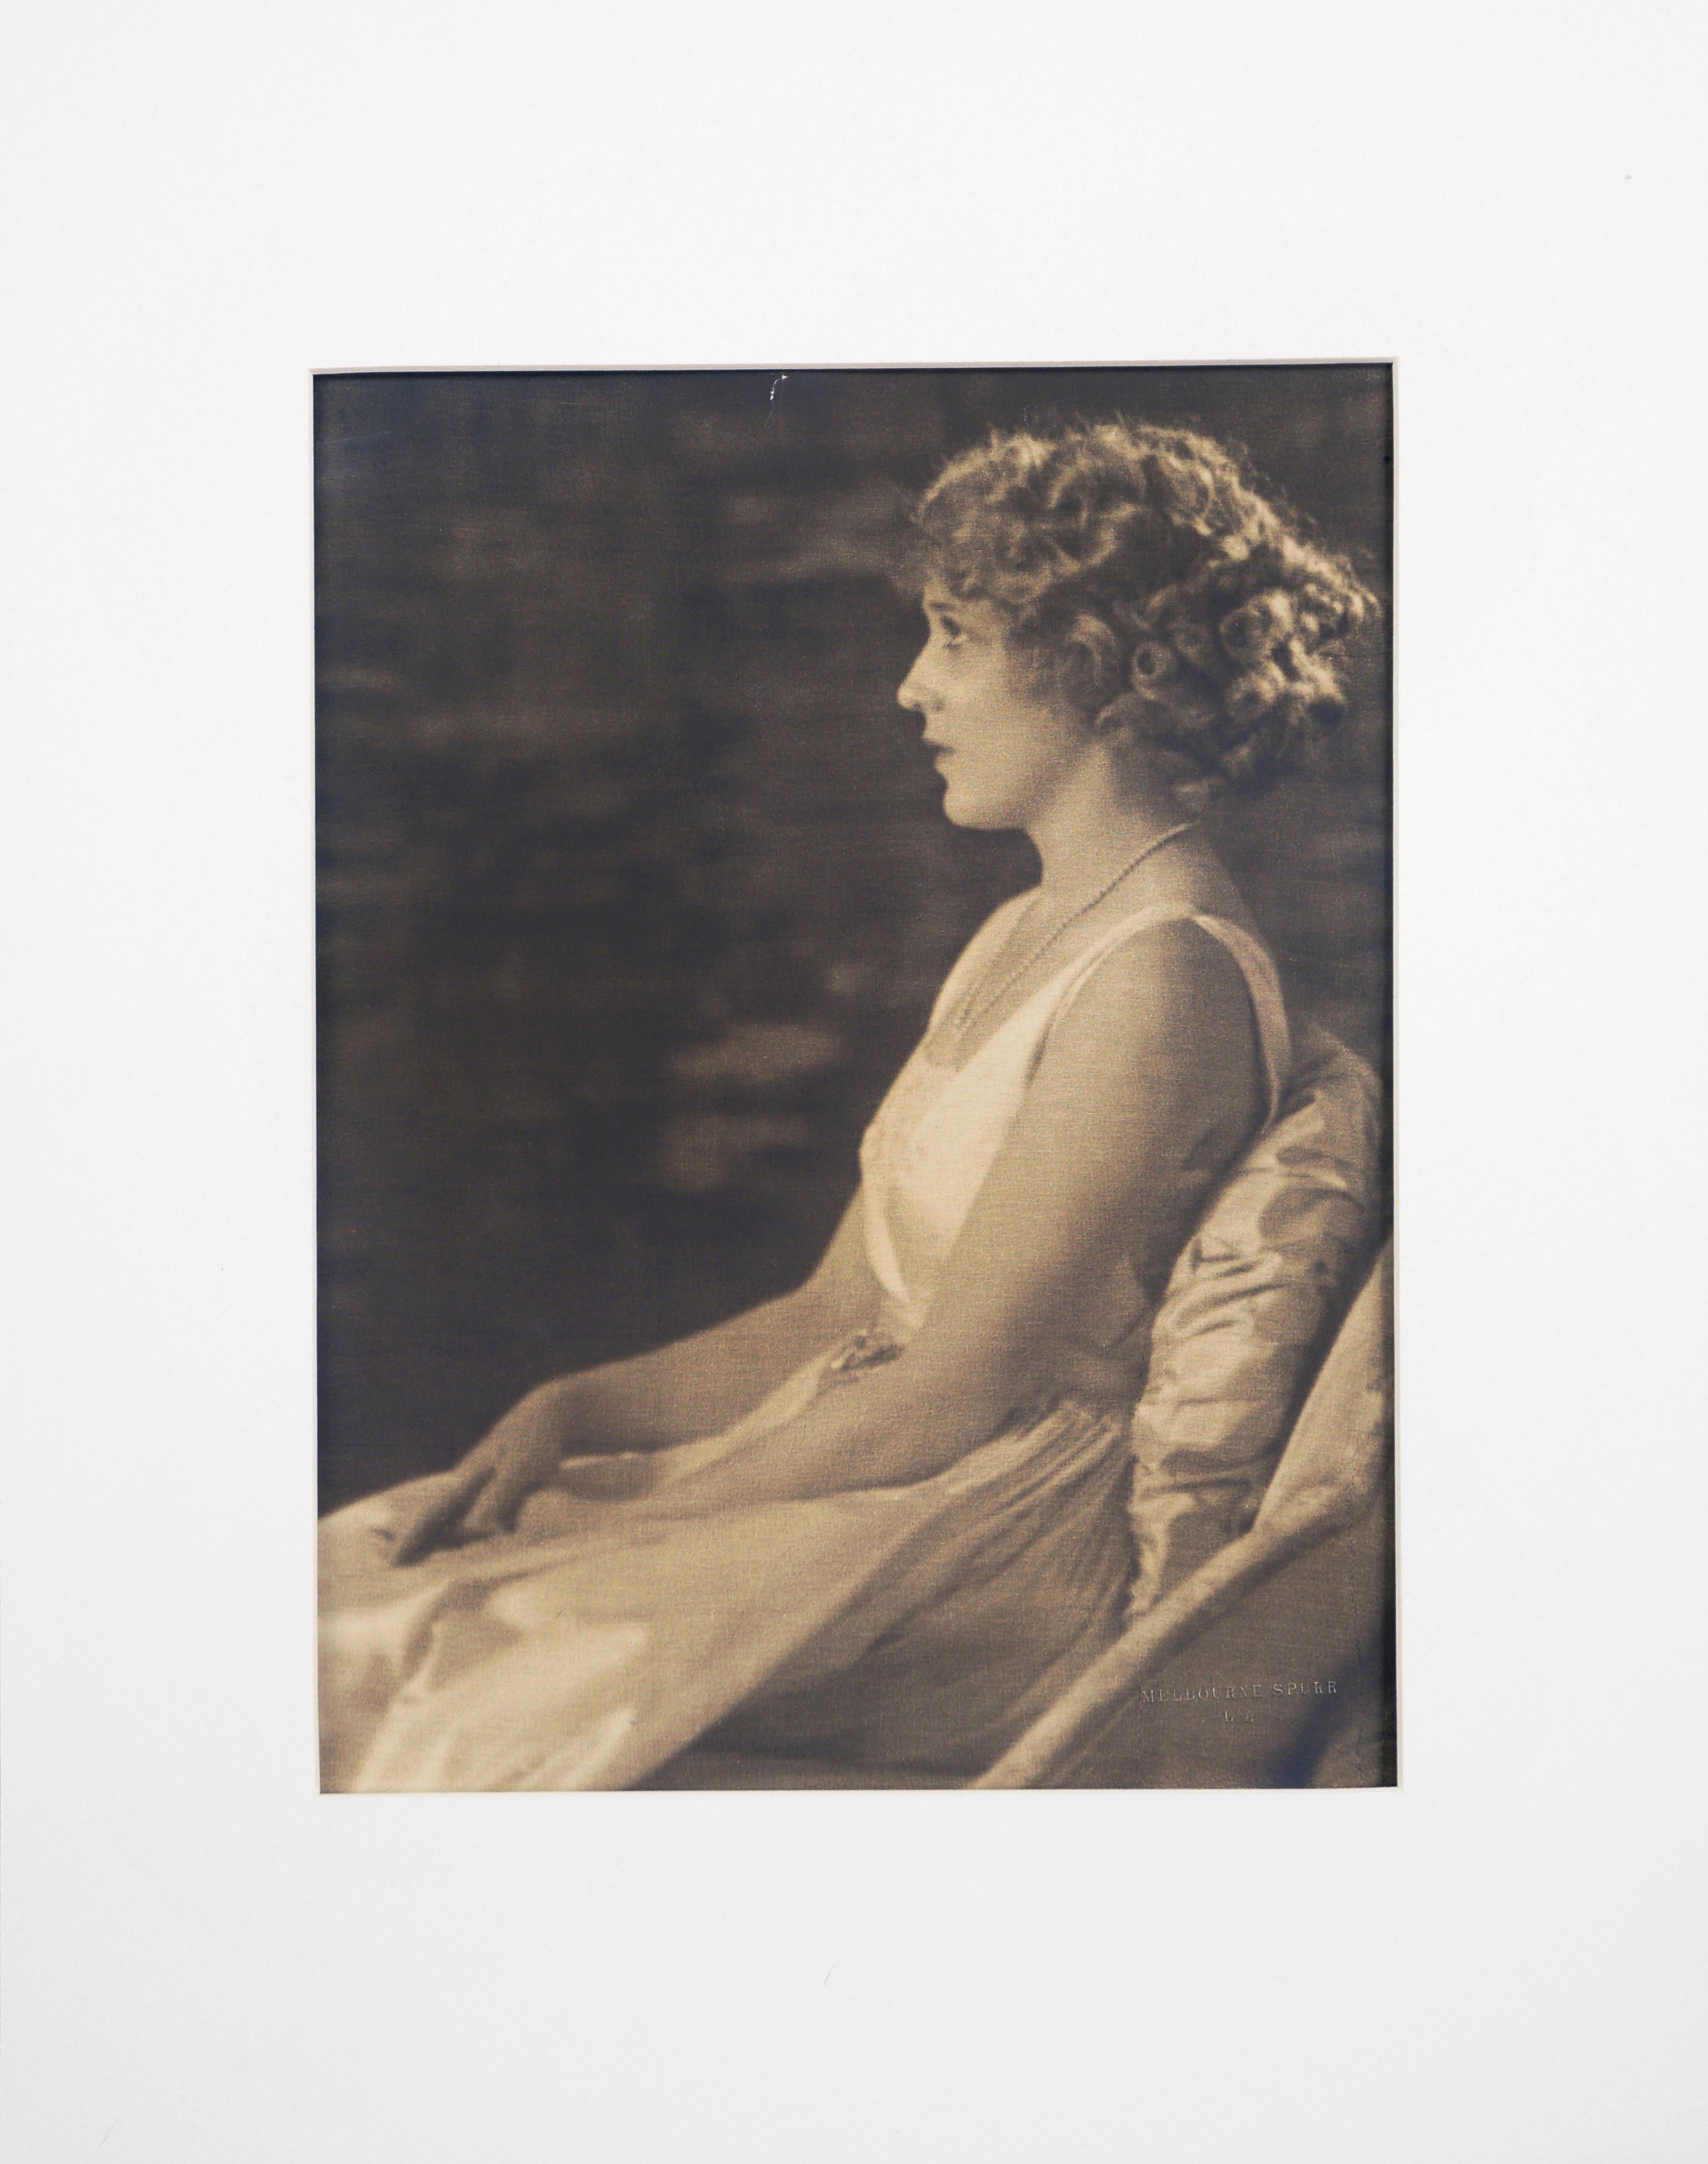 Photograph of Mary Pickford - Melbourne Spurr Photography - Silent Film Actress